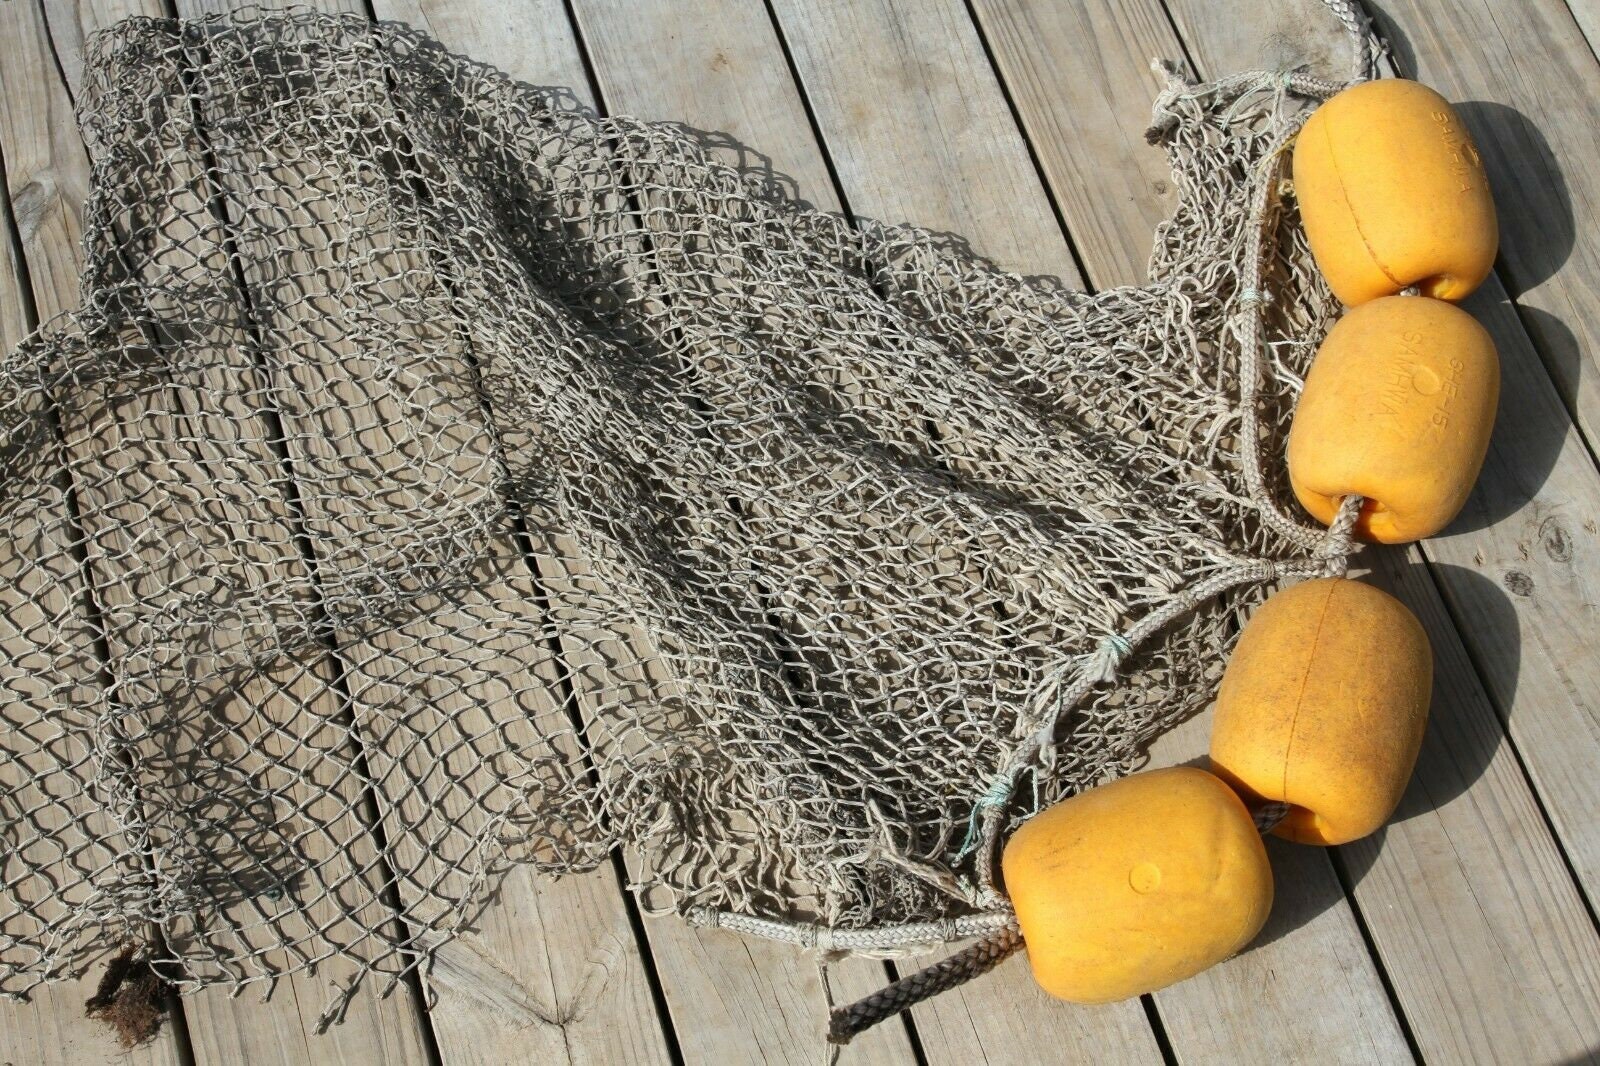 Large Authentic Ocean Fishing Netting Rope Floats Display Decor 3  Assemblies Free Ship 